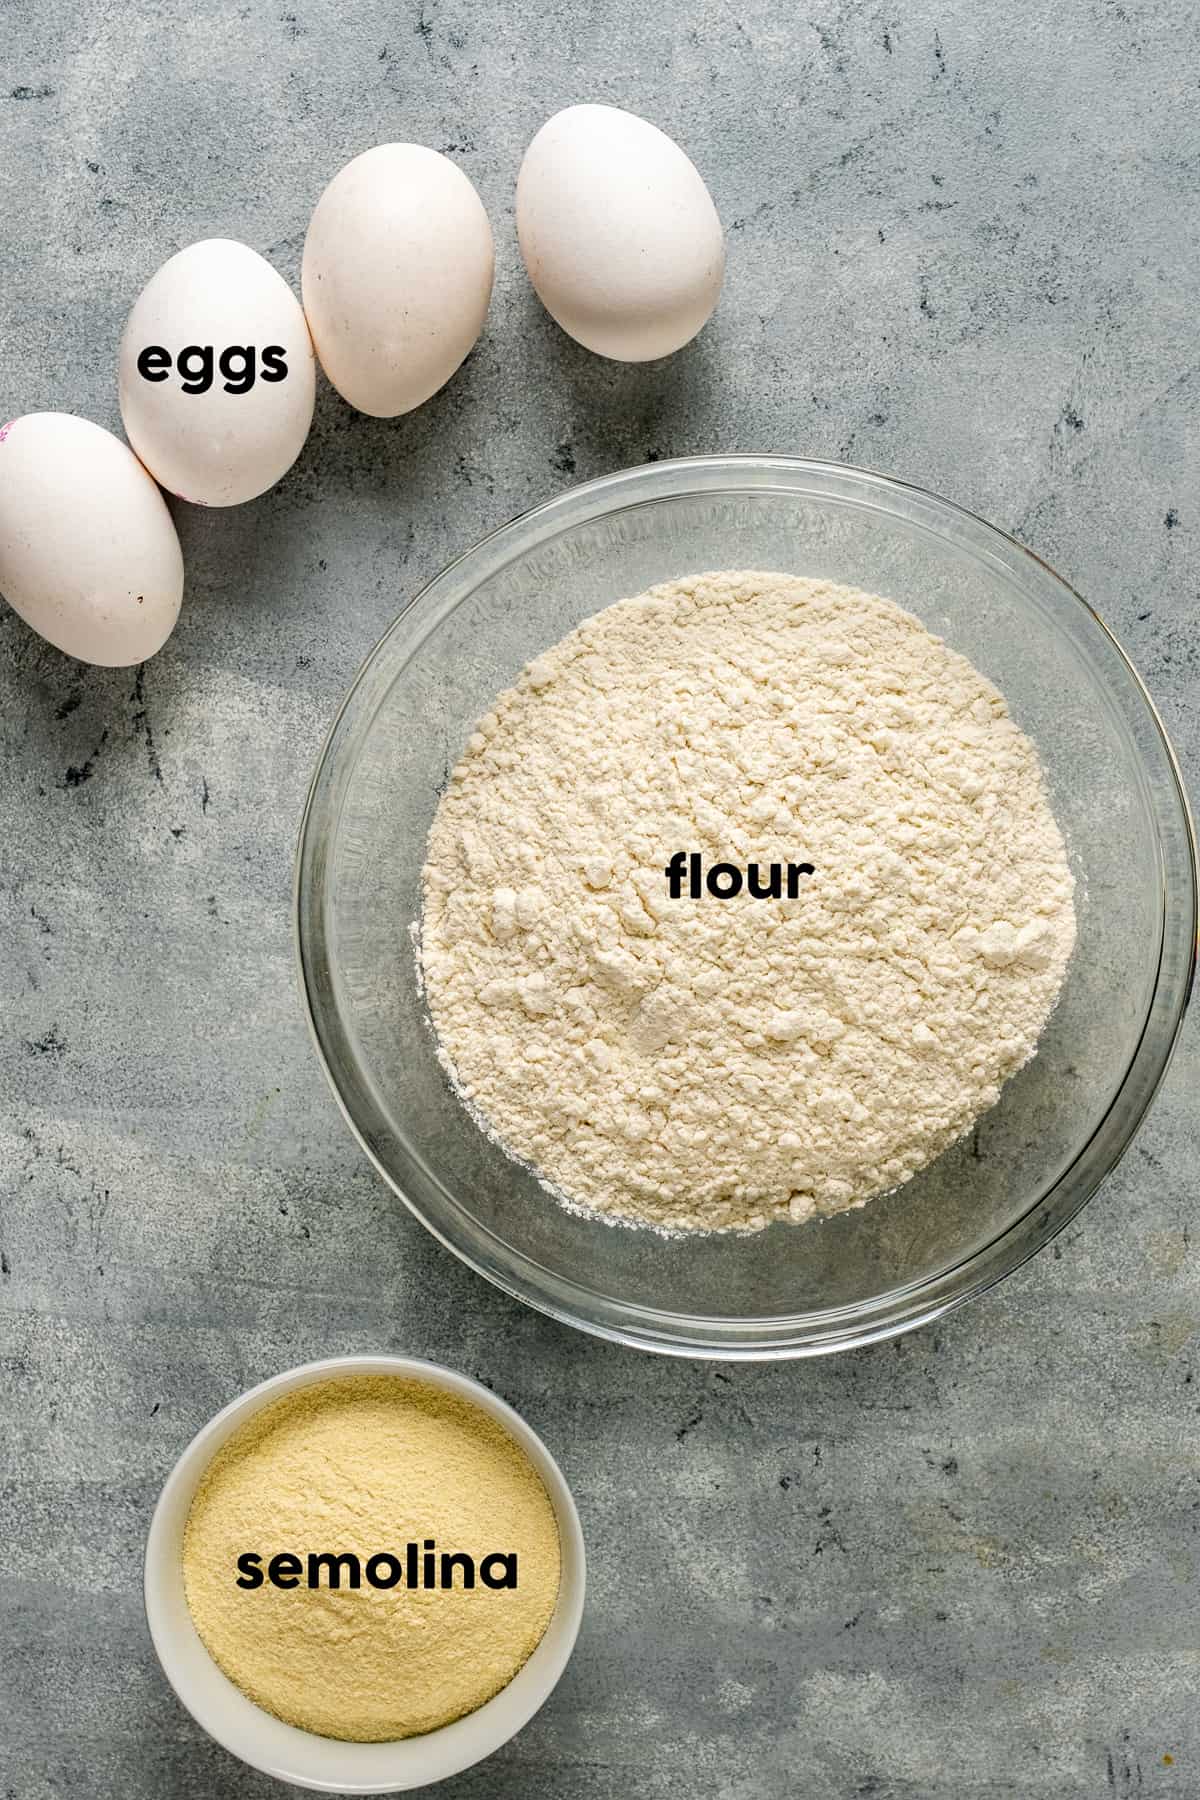 Flour in a large mixing bowl, semolina flour in a small bowl and eggs accompany on a grey background.